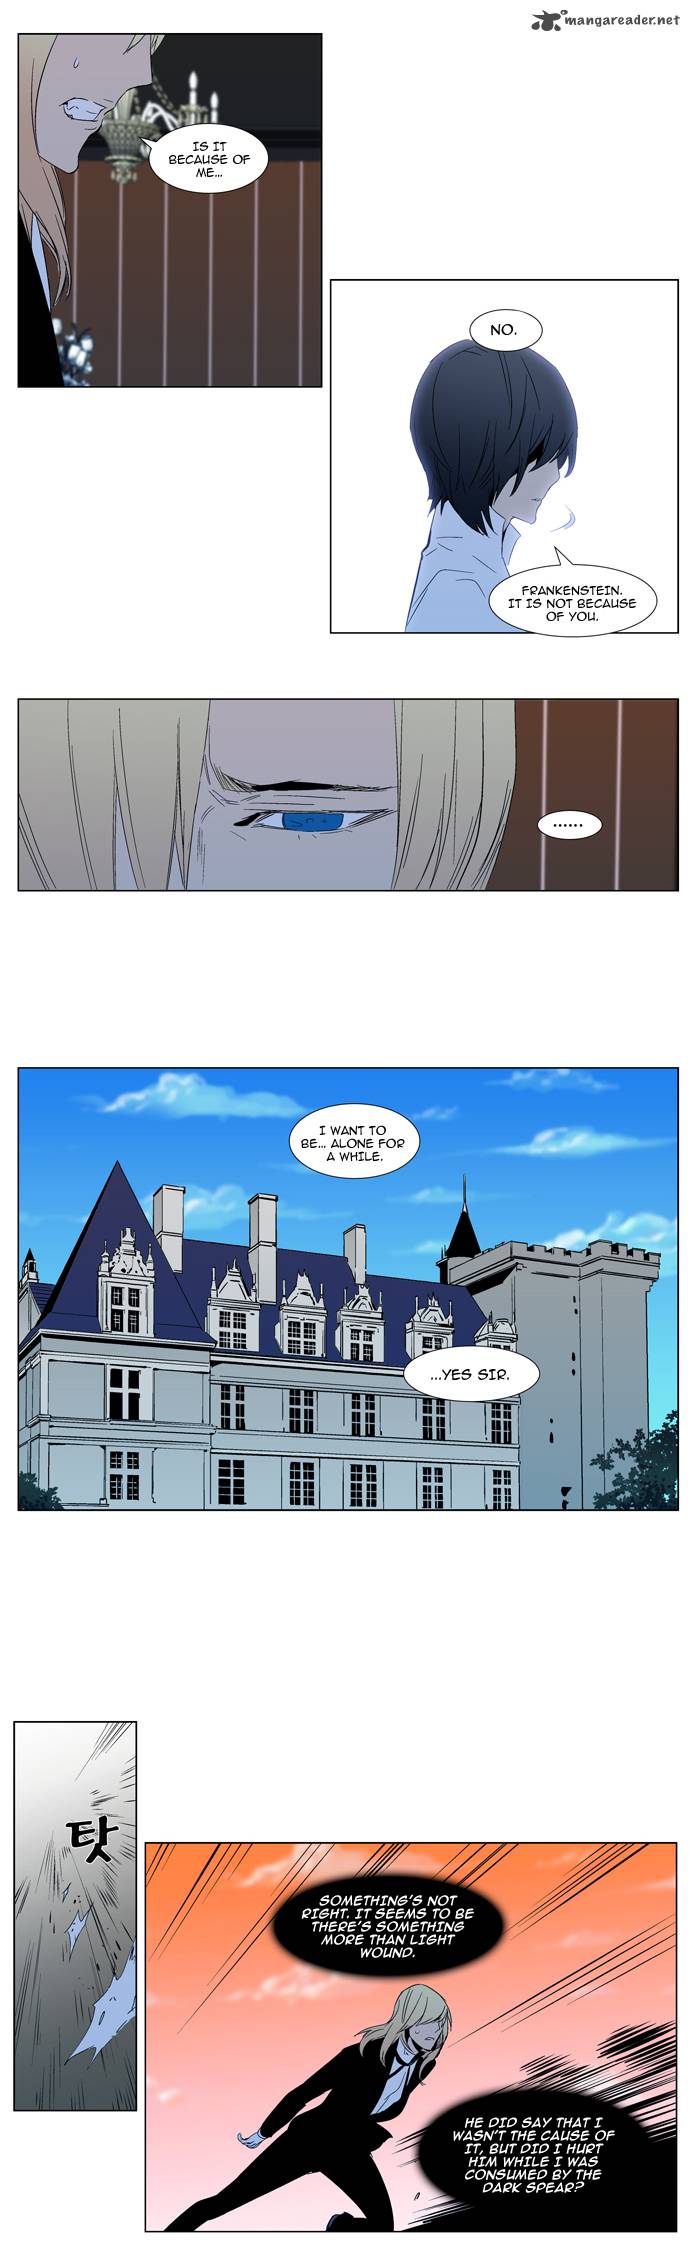 Noblesse 295 9